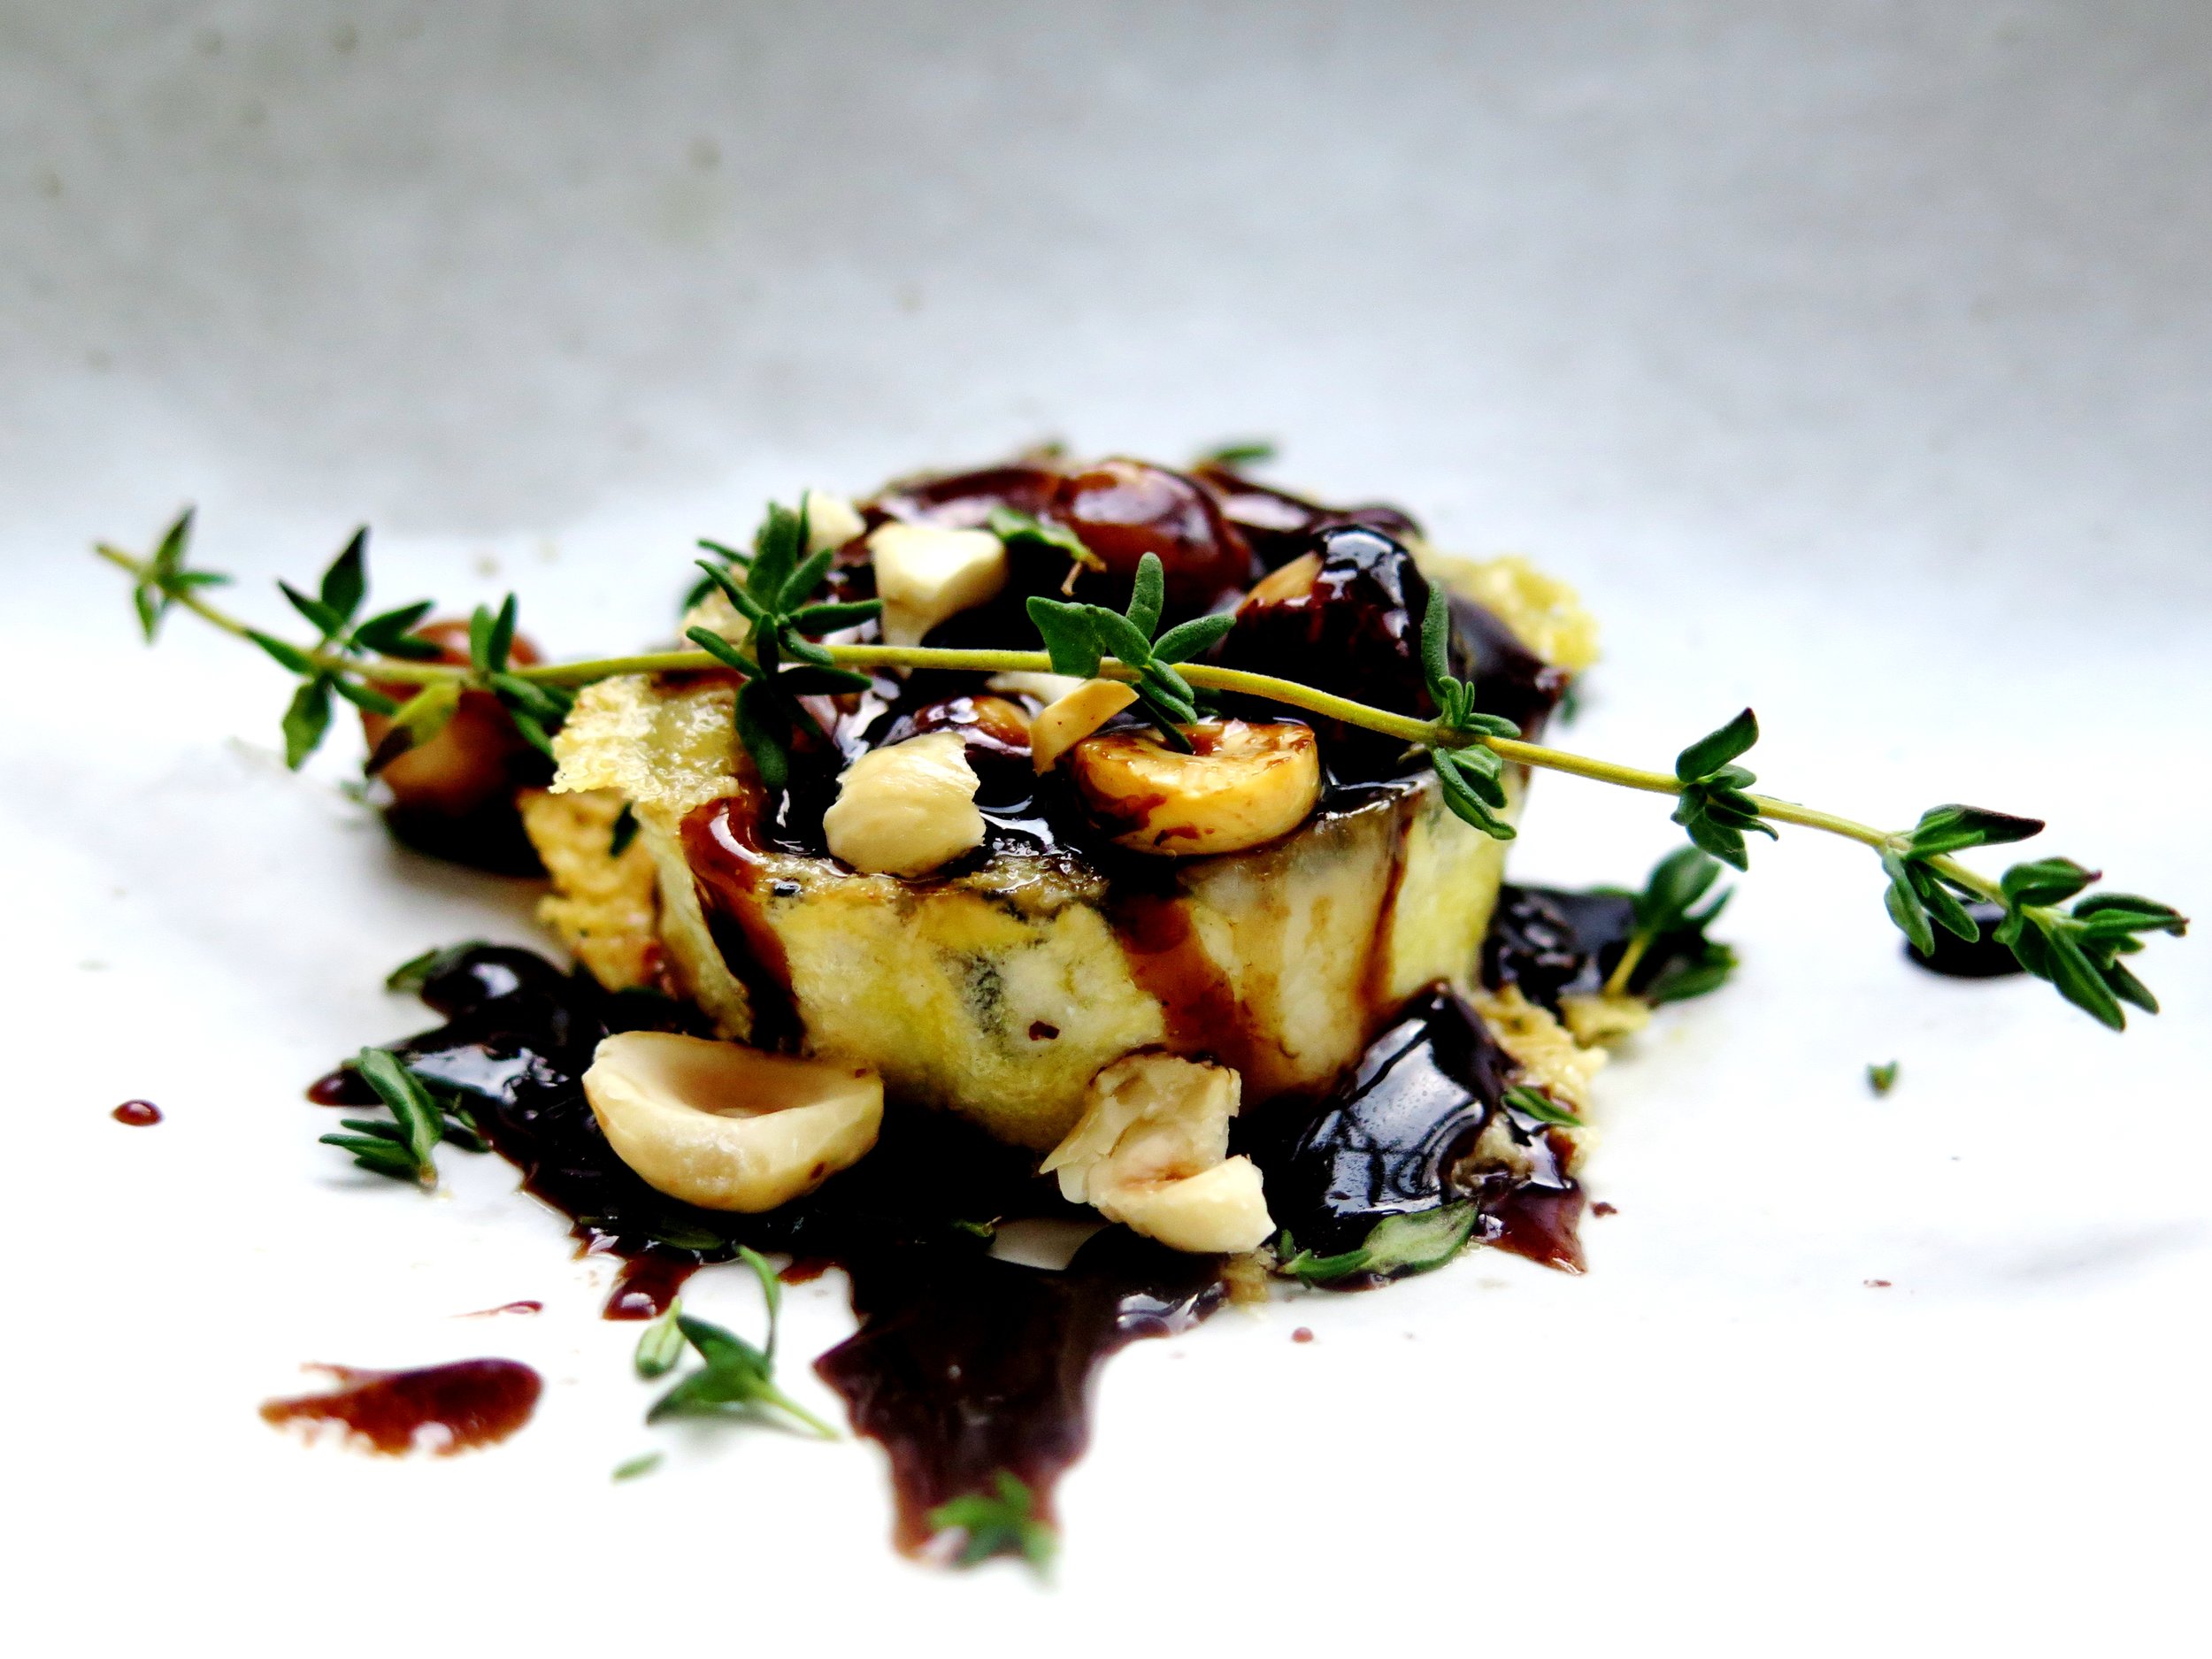 Crispy molten goat’s cheese with caramelised, thyme-infused maple balsamic and toasted hazelnuts